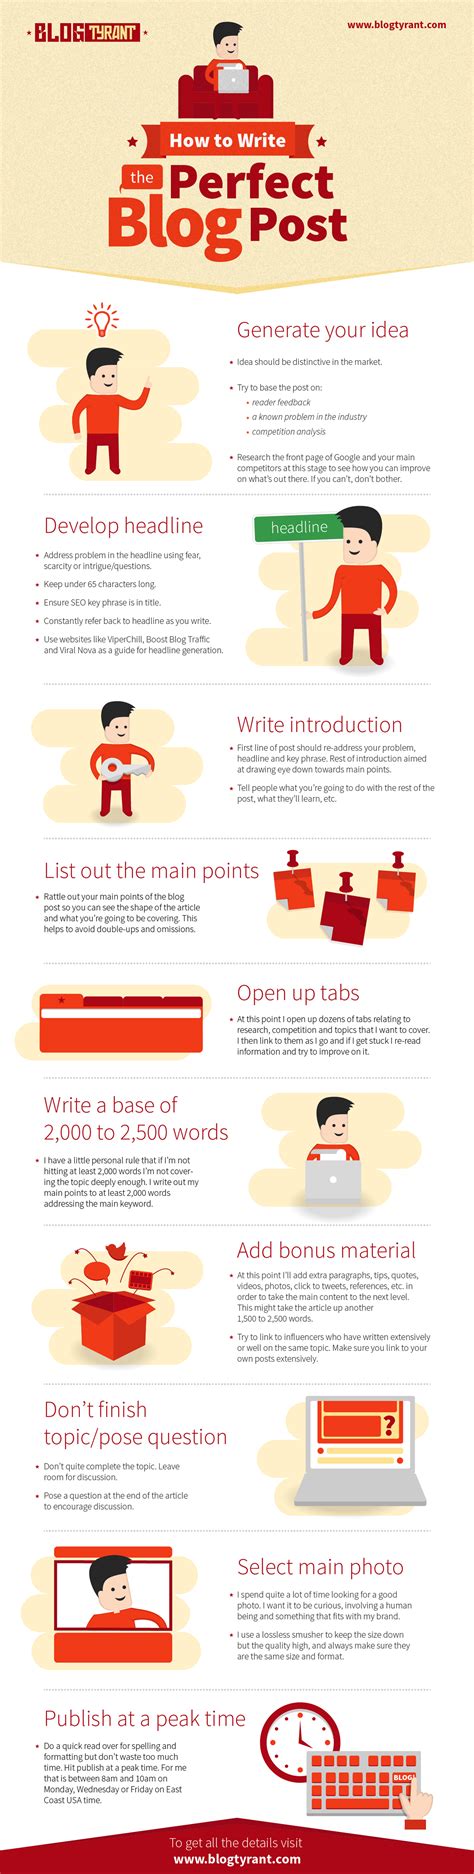 Awesome Tips For Writing Brilliant Blog Posts INFOGRAPHIC